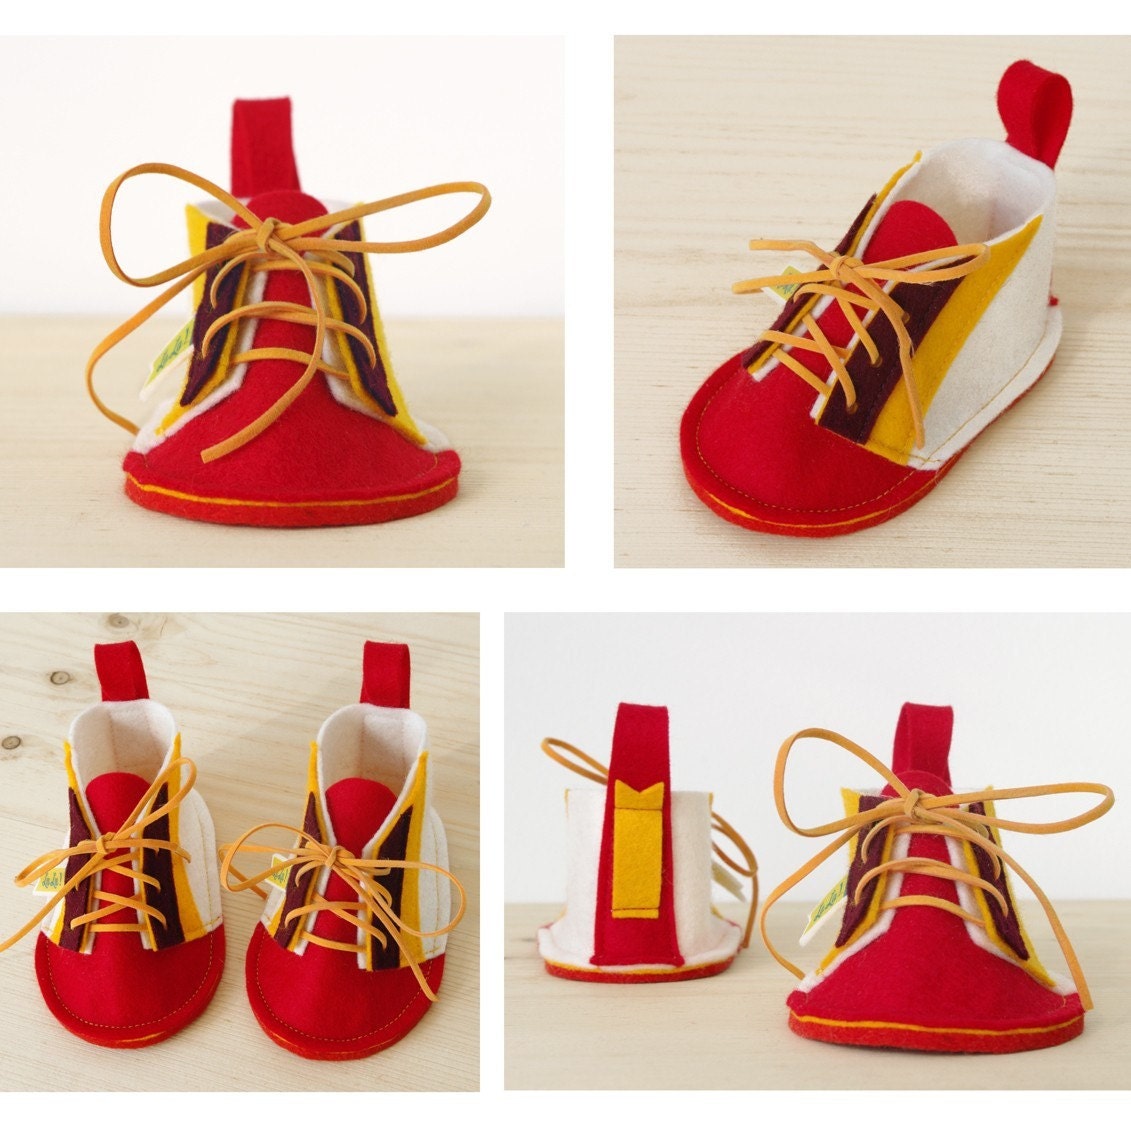 Eco baby booties Red Wawa soft sole baby shoes, Retro Modern design for boys & girls - red, white, yellow